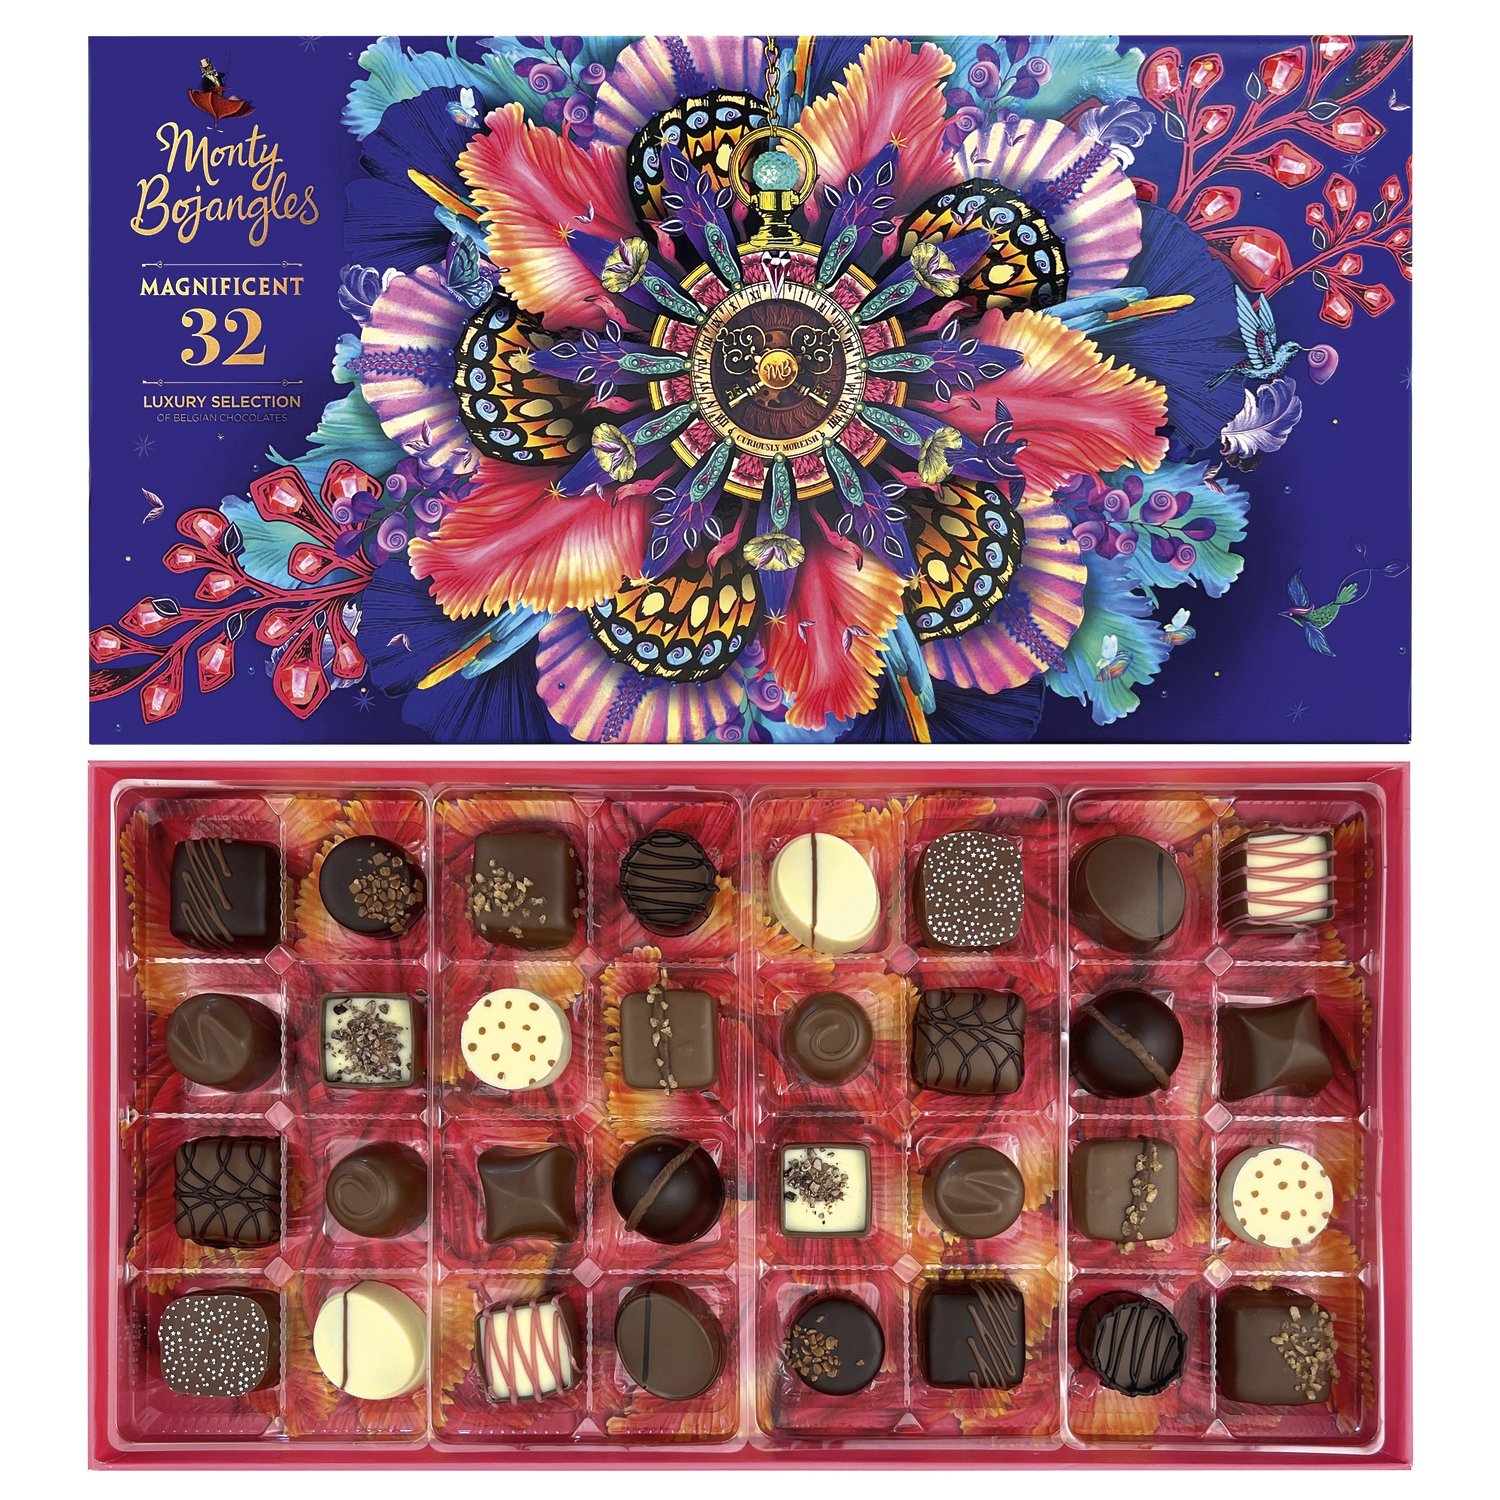 Magnificent 32 luxury Belgian chocolate and truffles gift box - 6x452g